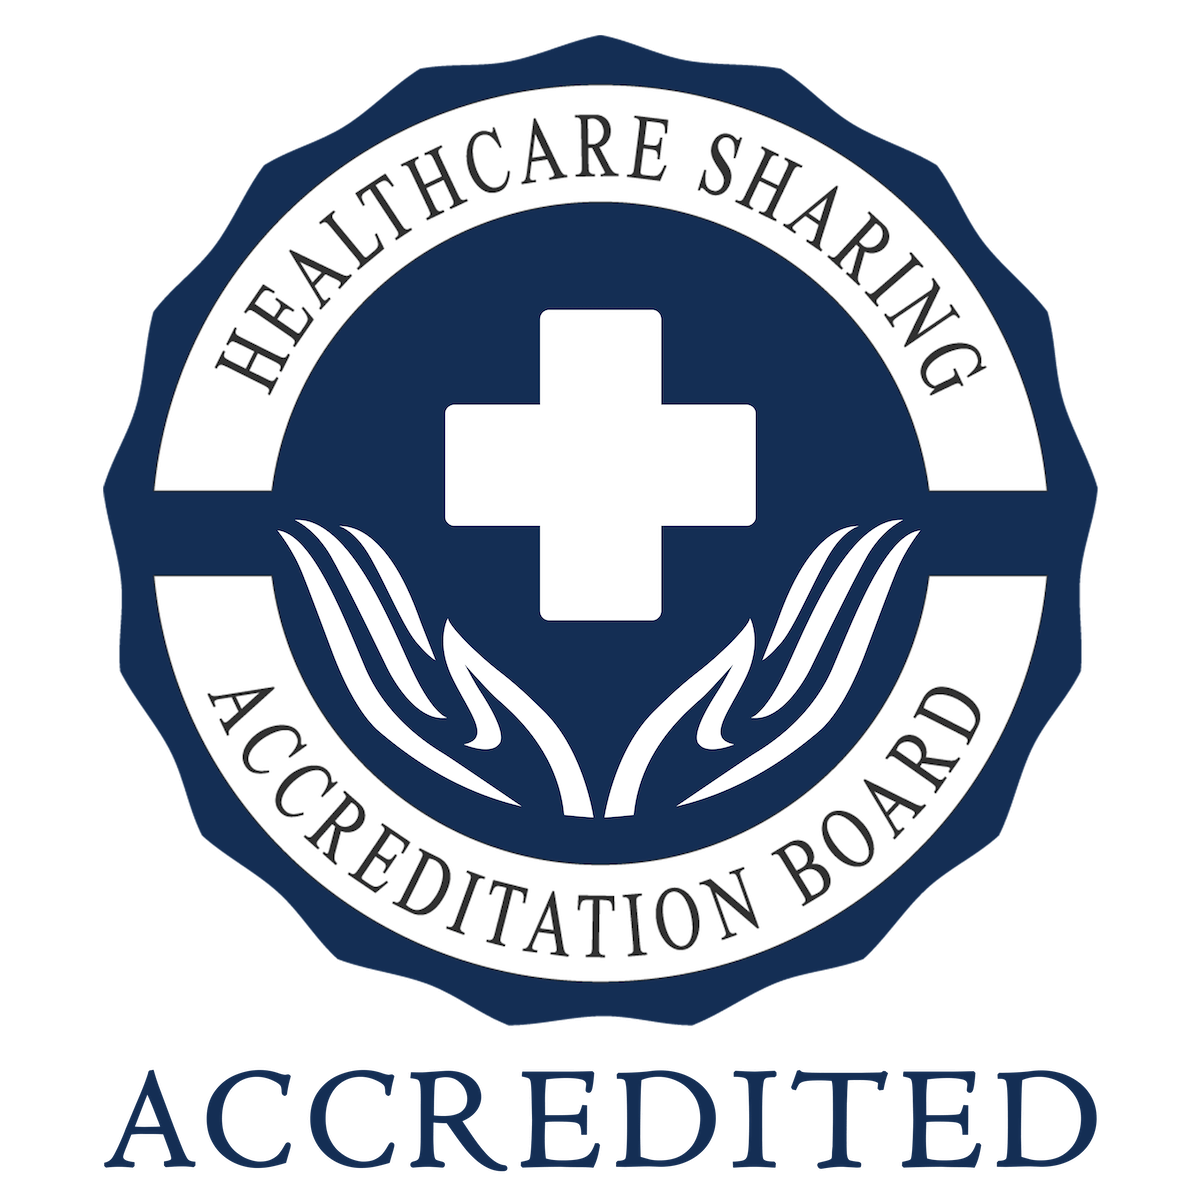 Healthcare Sharing Accreditation Board — Accredited. 